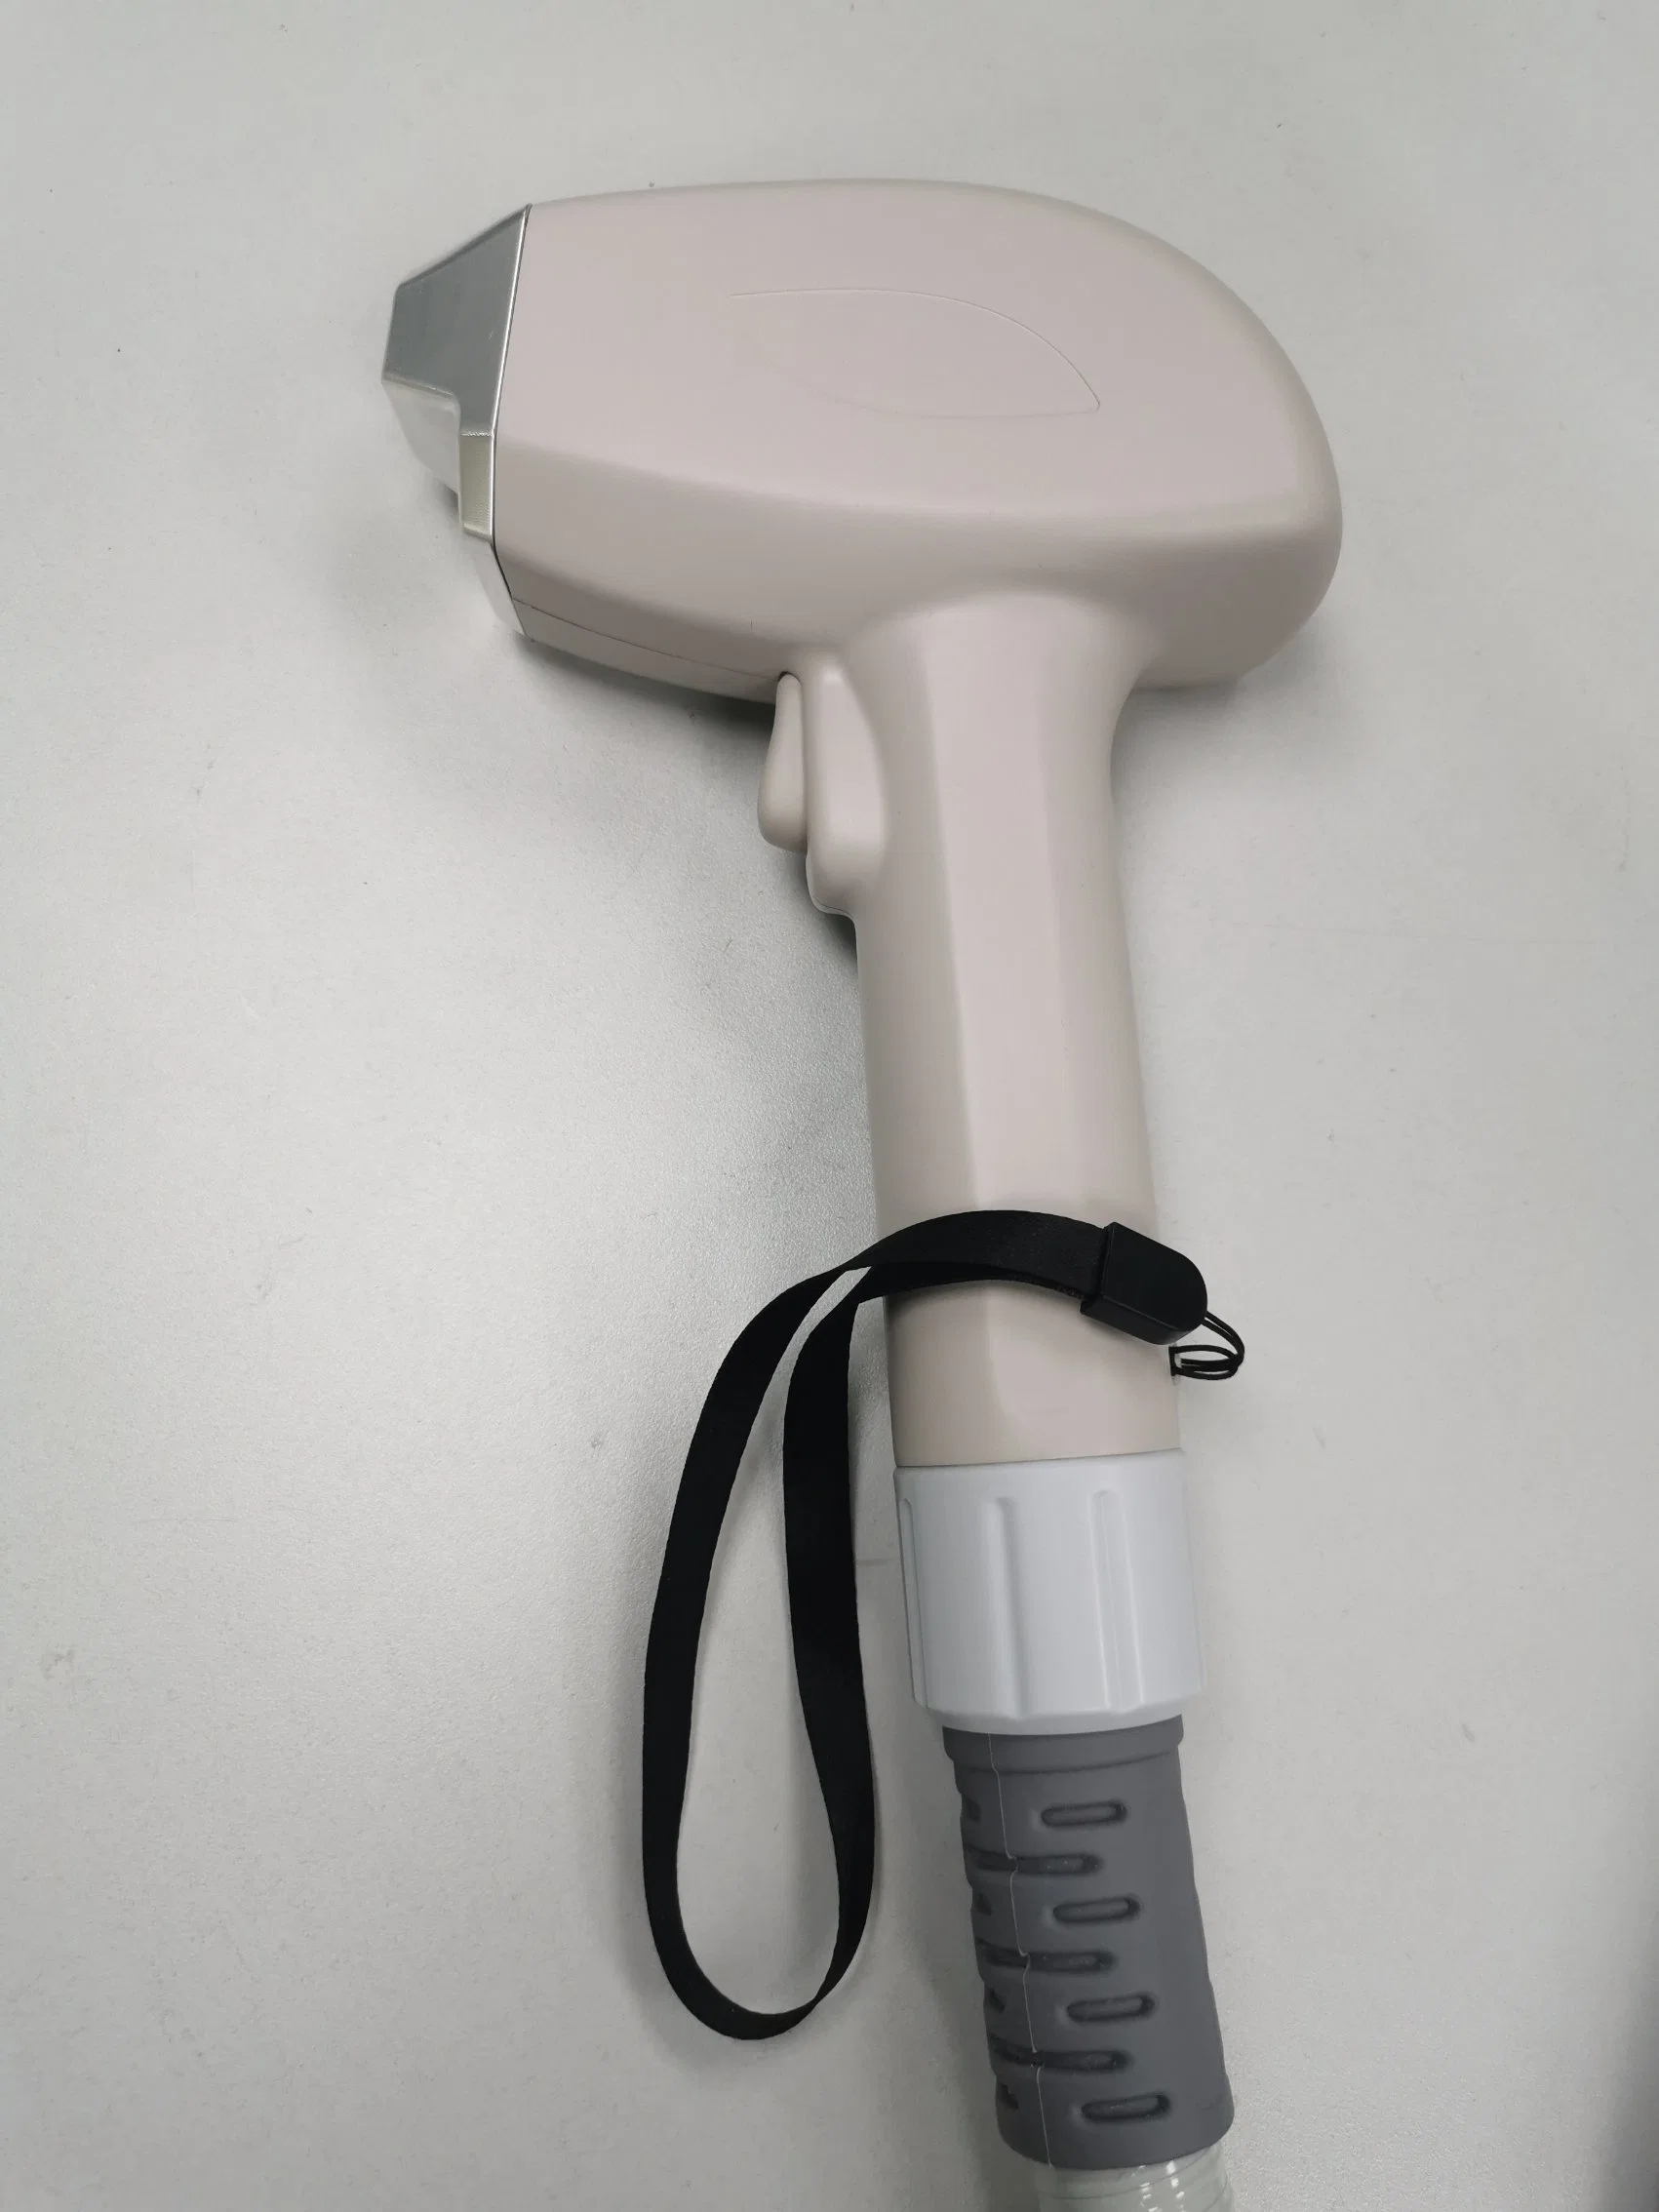 808nm Diode Laser Permanent Hair Removal Beauty Equipment